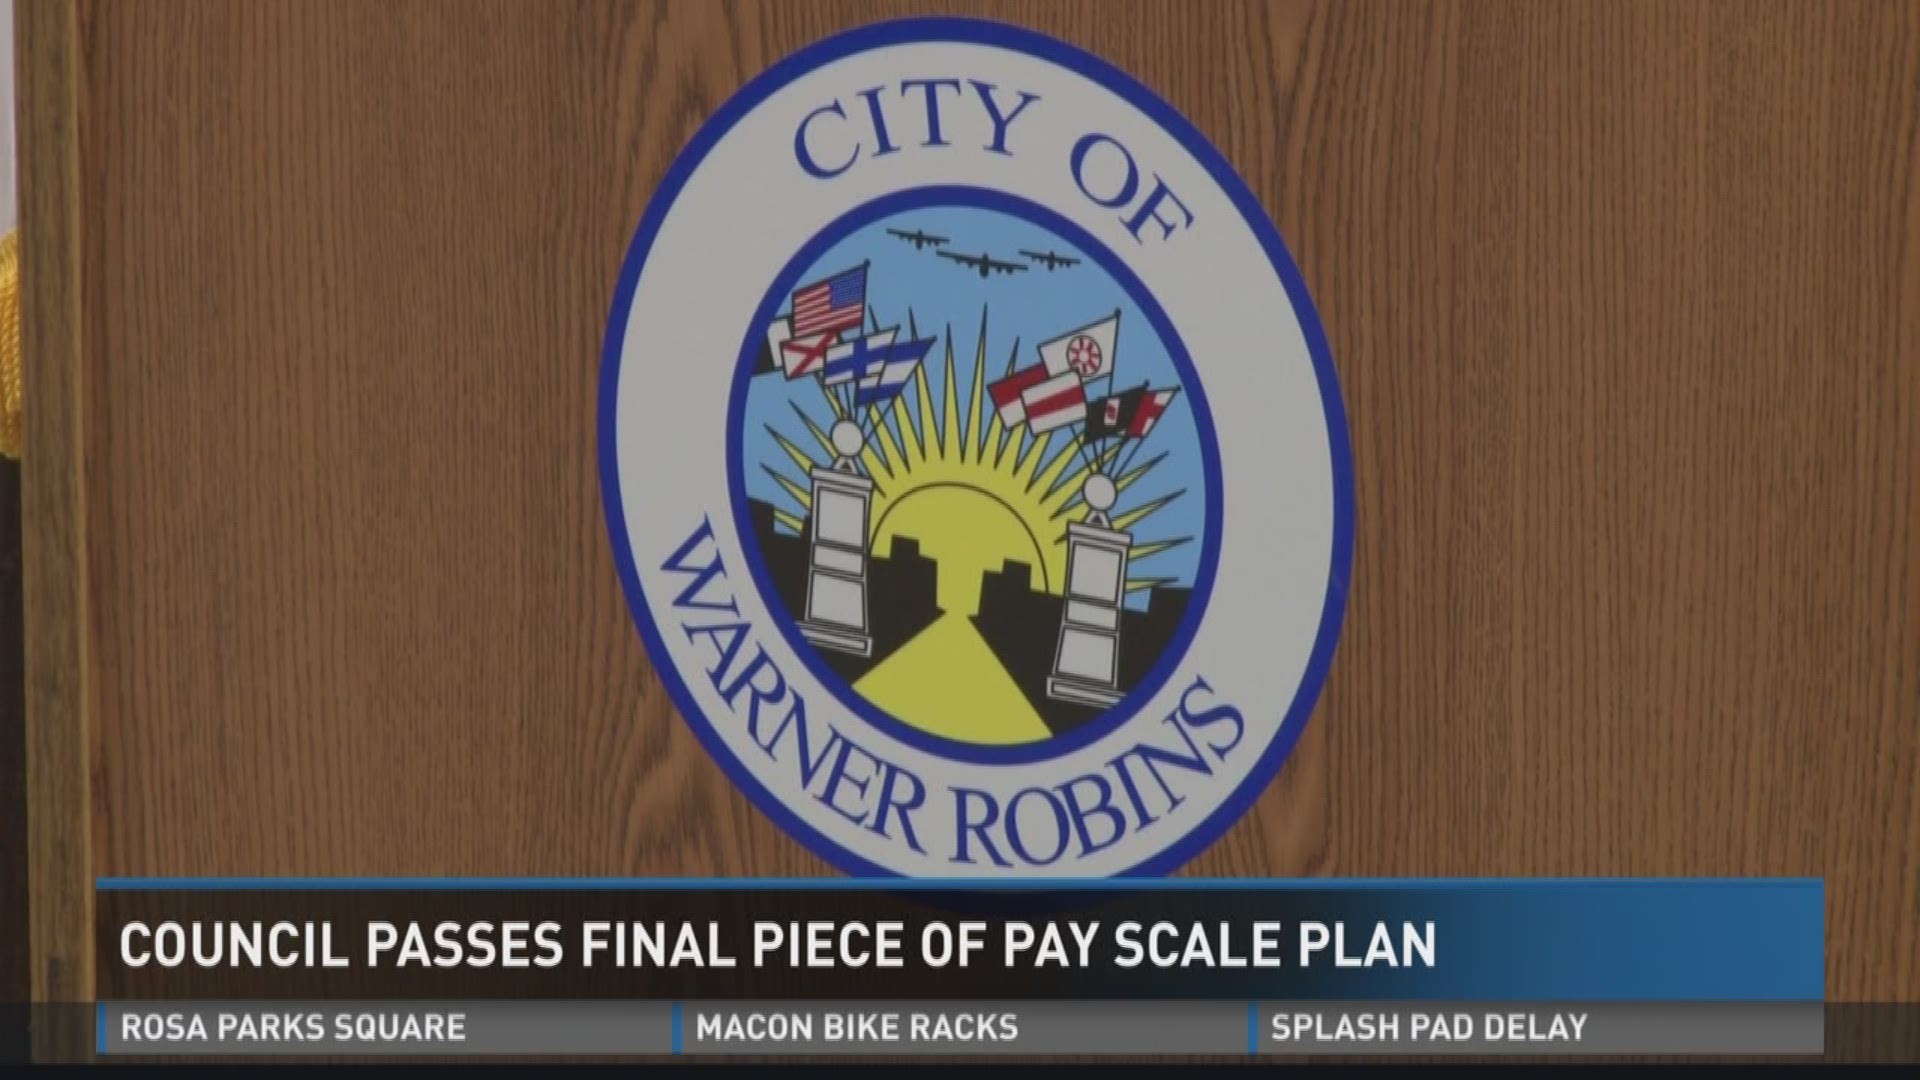 Warner Robins council passes final piece of pay scale plan